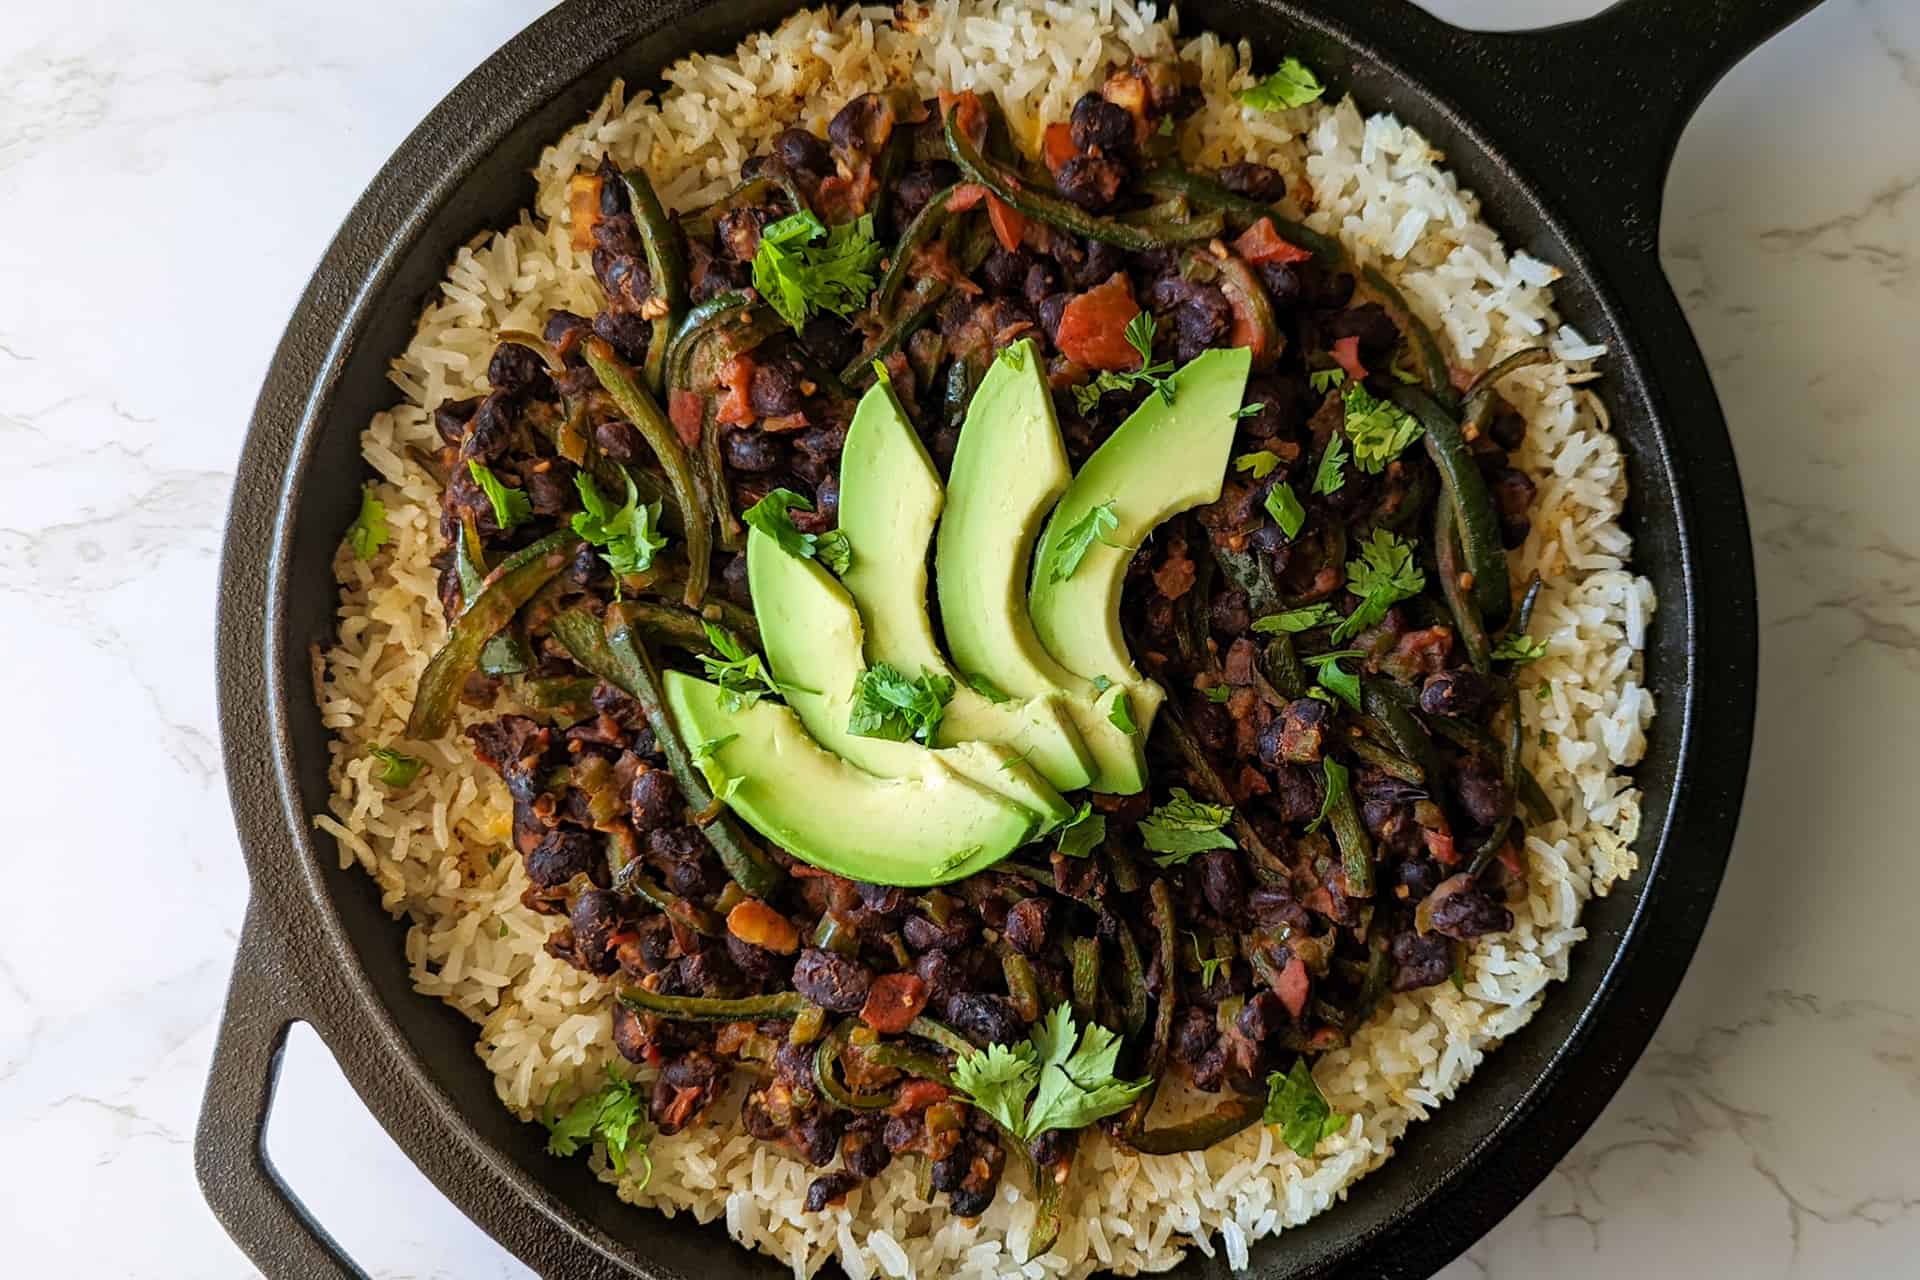 A black bean and rice bake in a cast iron skillet topped with sliced avocado